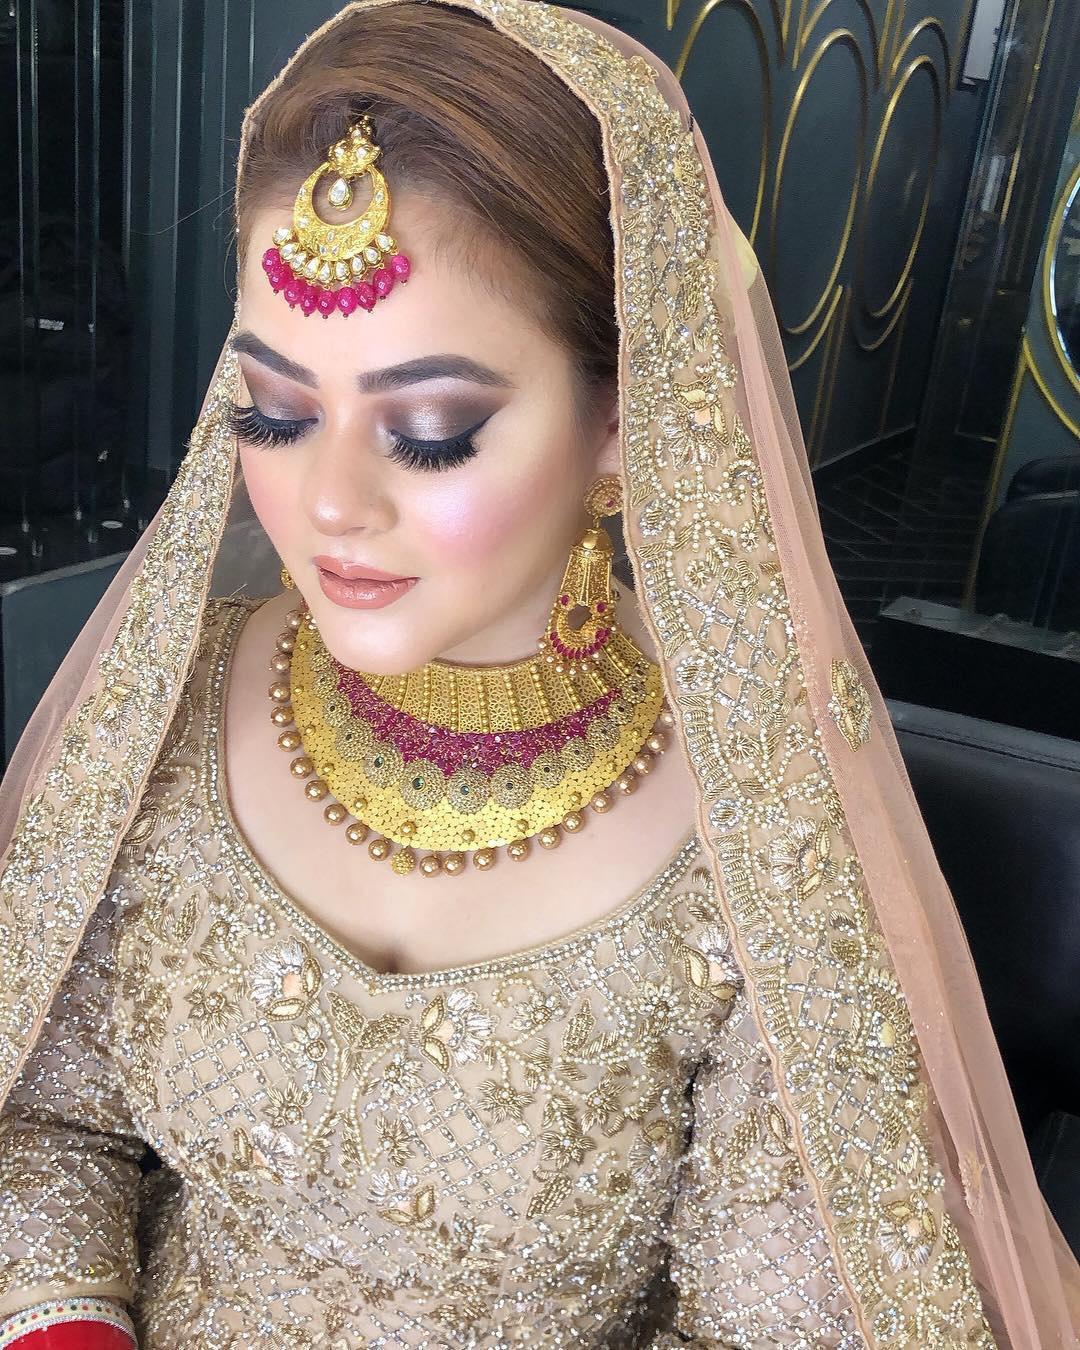 Derive Centrum Aktuator Airbrush Bridal Makeup: Why Opt For It For Your Bridal Look